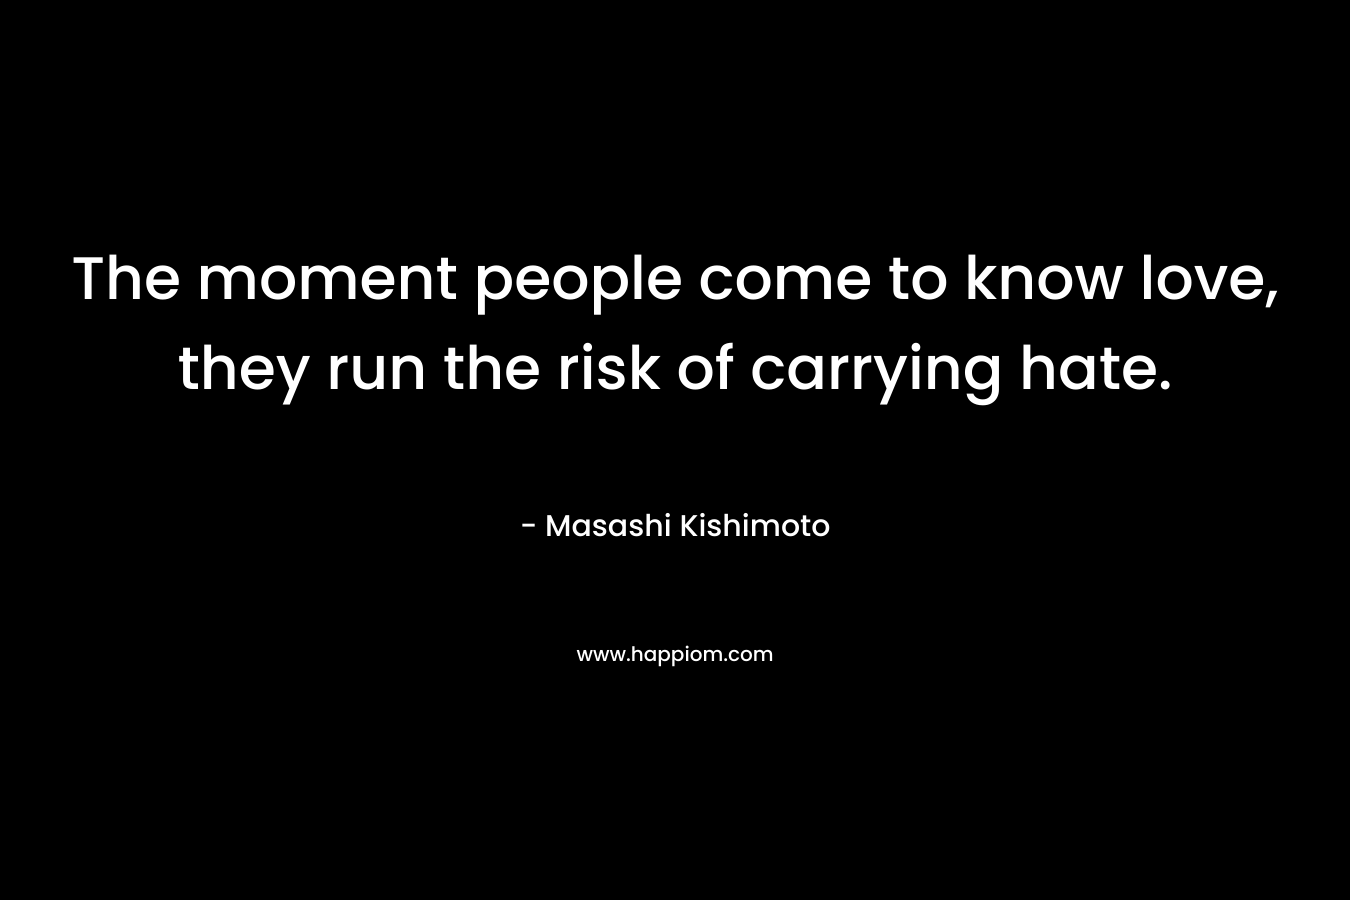 The moment people come to know love, they run the risk of carrying hate. – Masashi Kishimoto